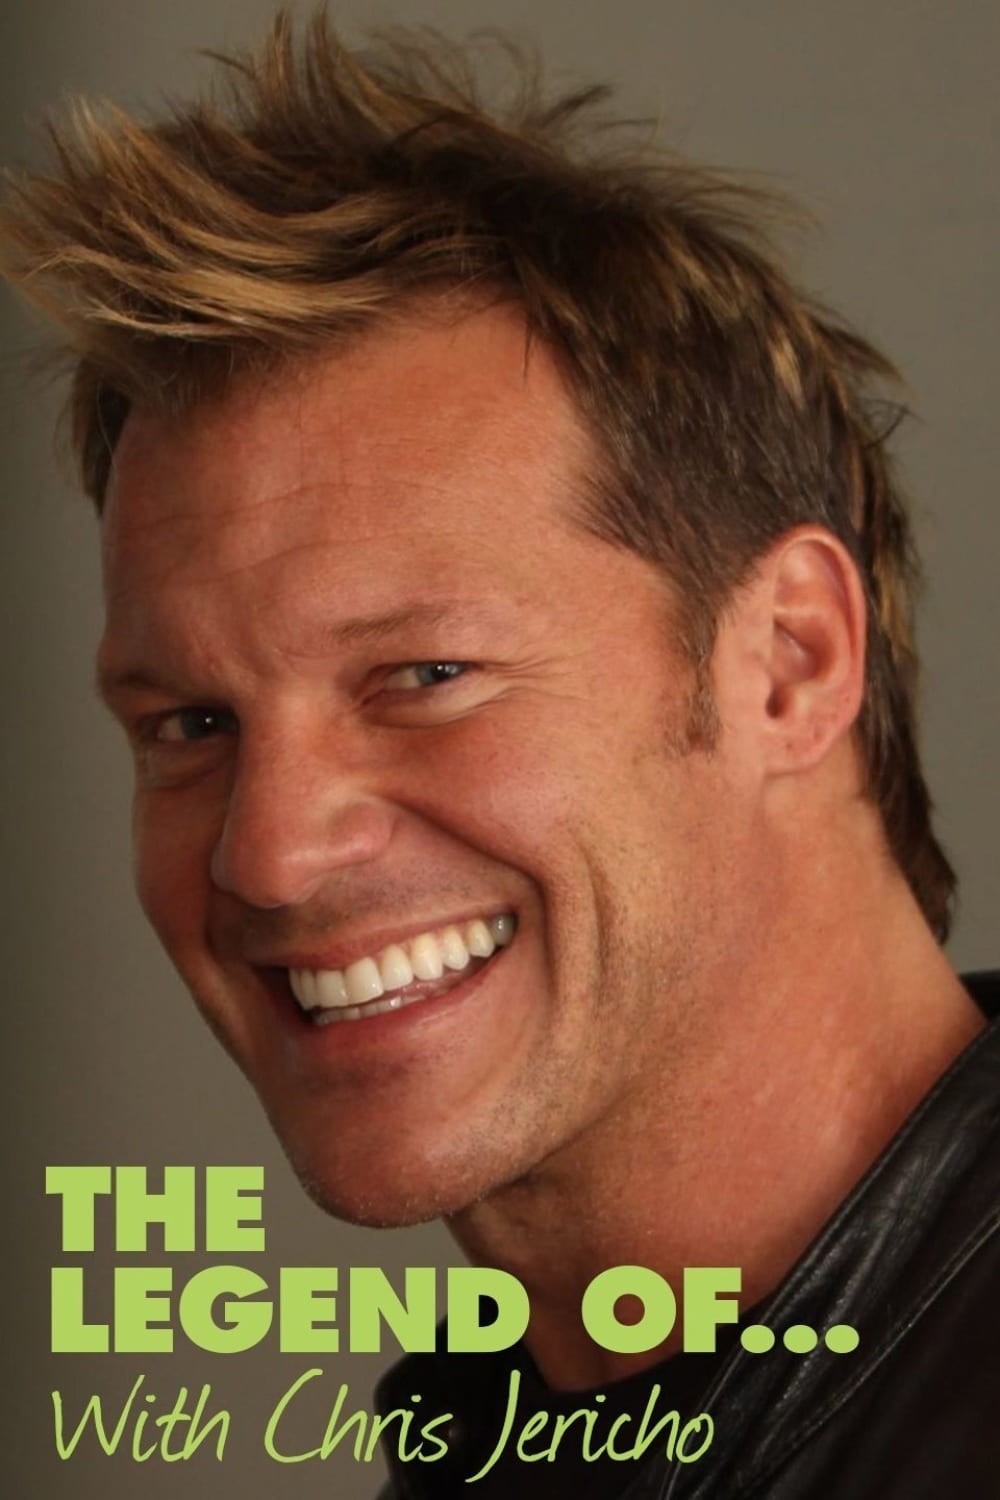 The Legend Of ... with Chris Jericho